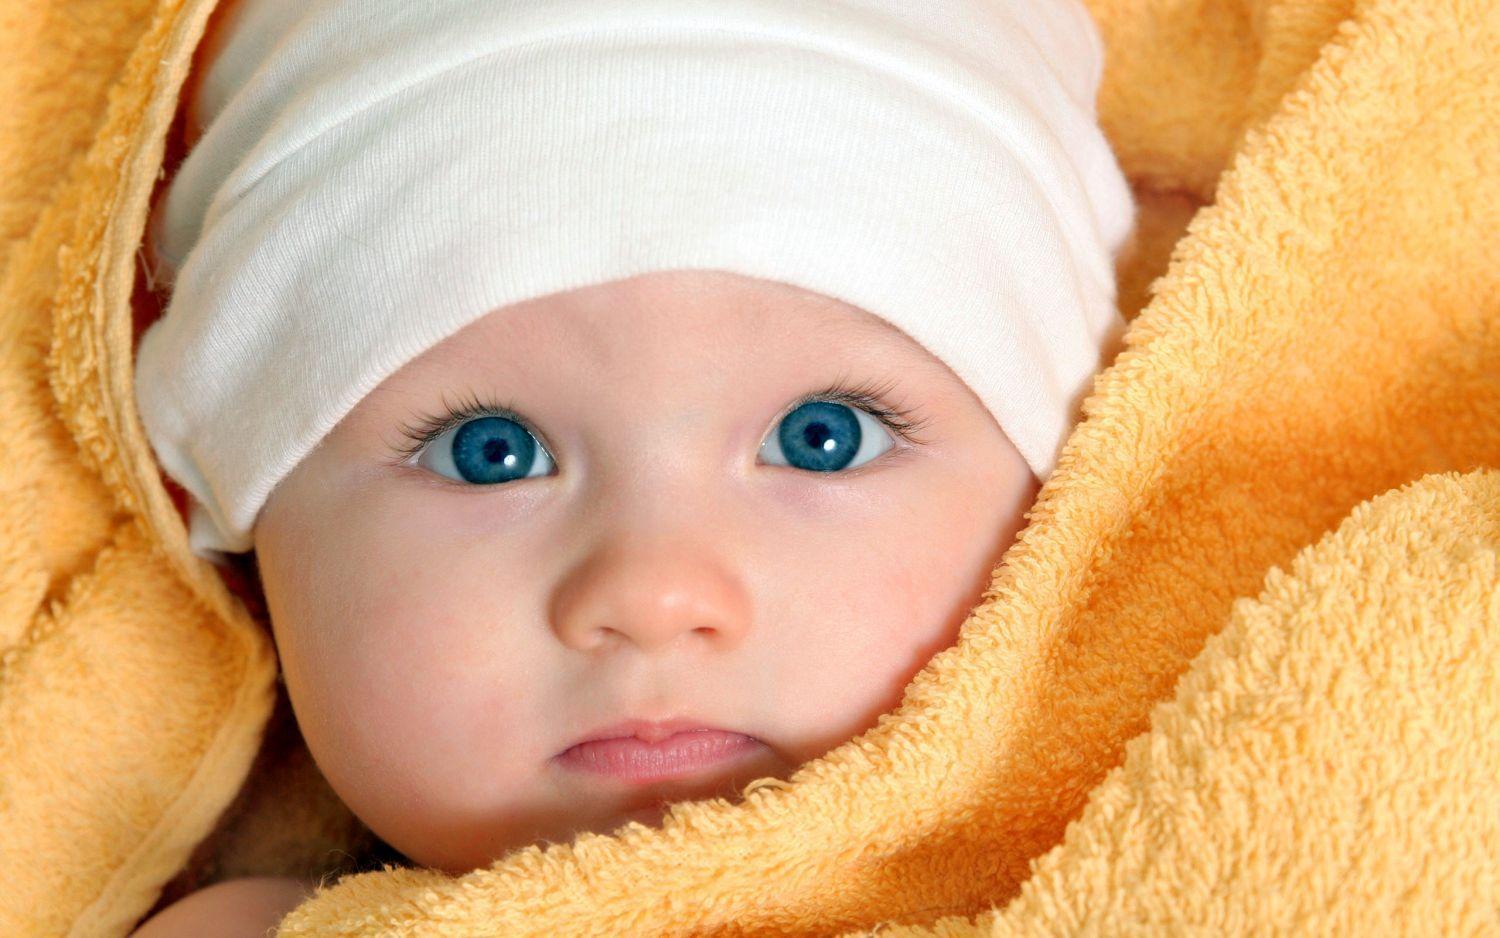 cute baby models wallpaper, cute baby image large size, cute